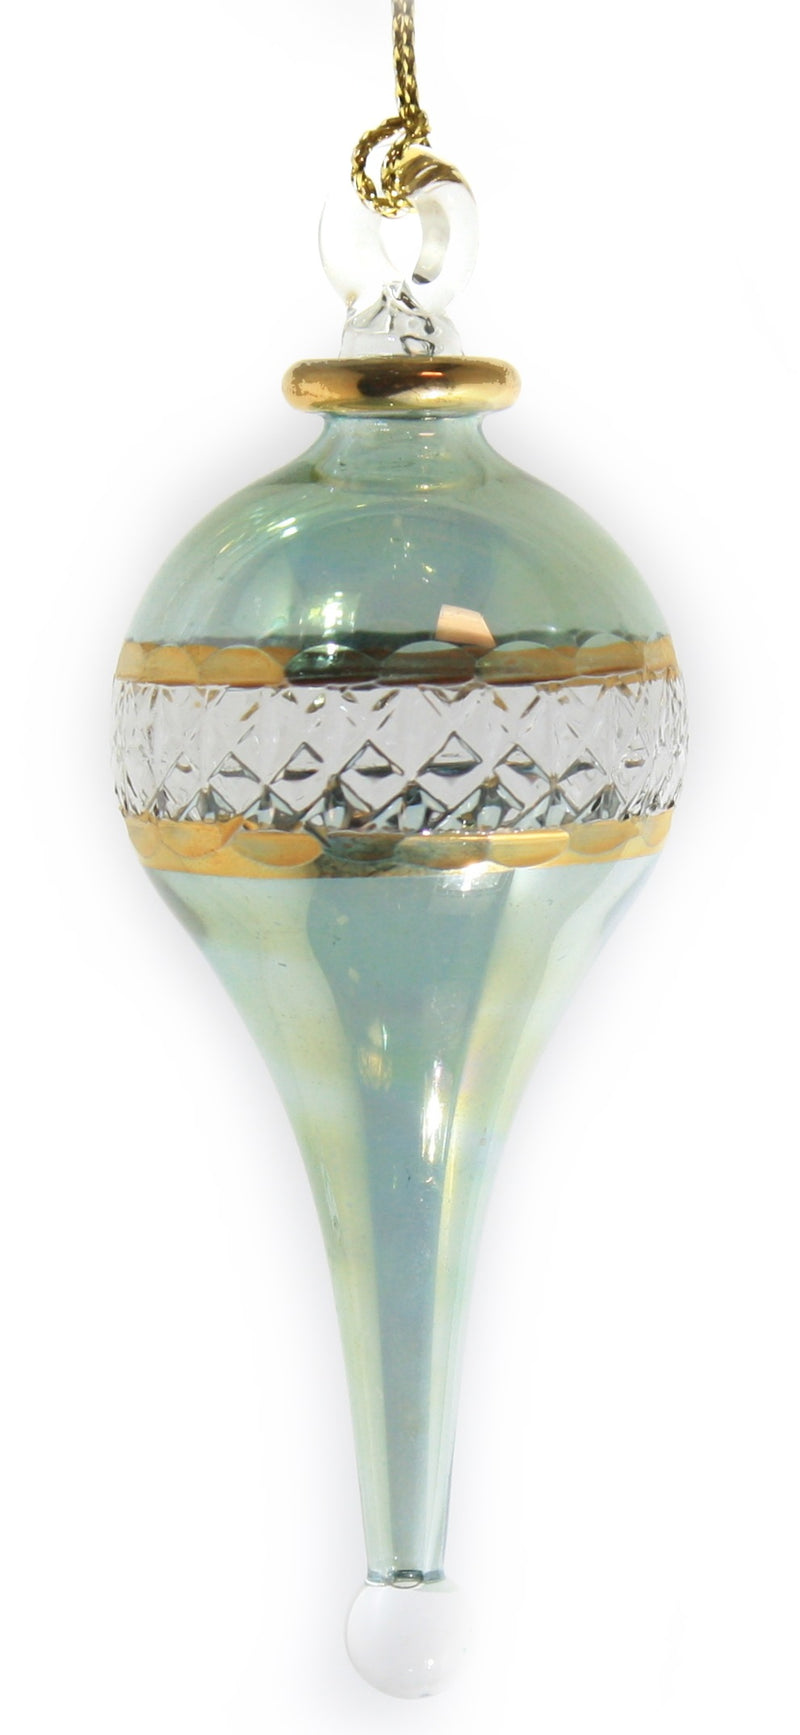 Lattice Glass Ornaments With Gold Accents - Green Stretched Teardrop